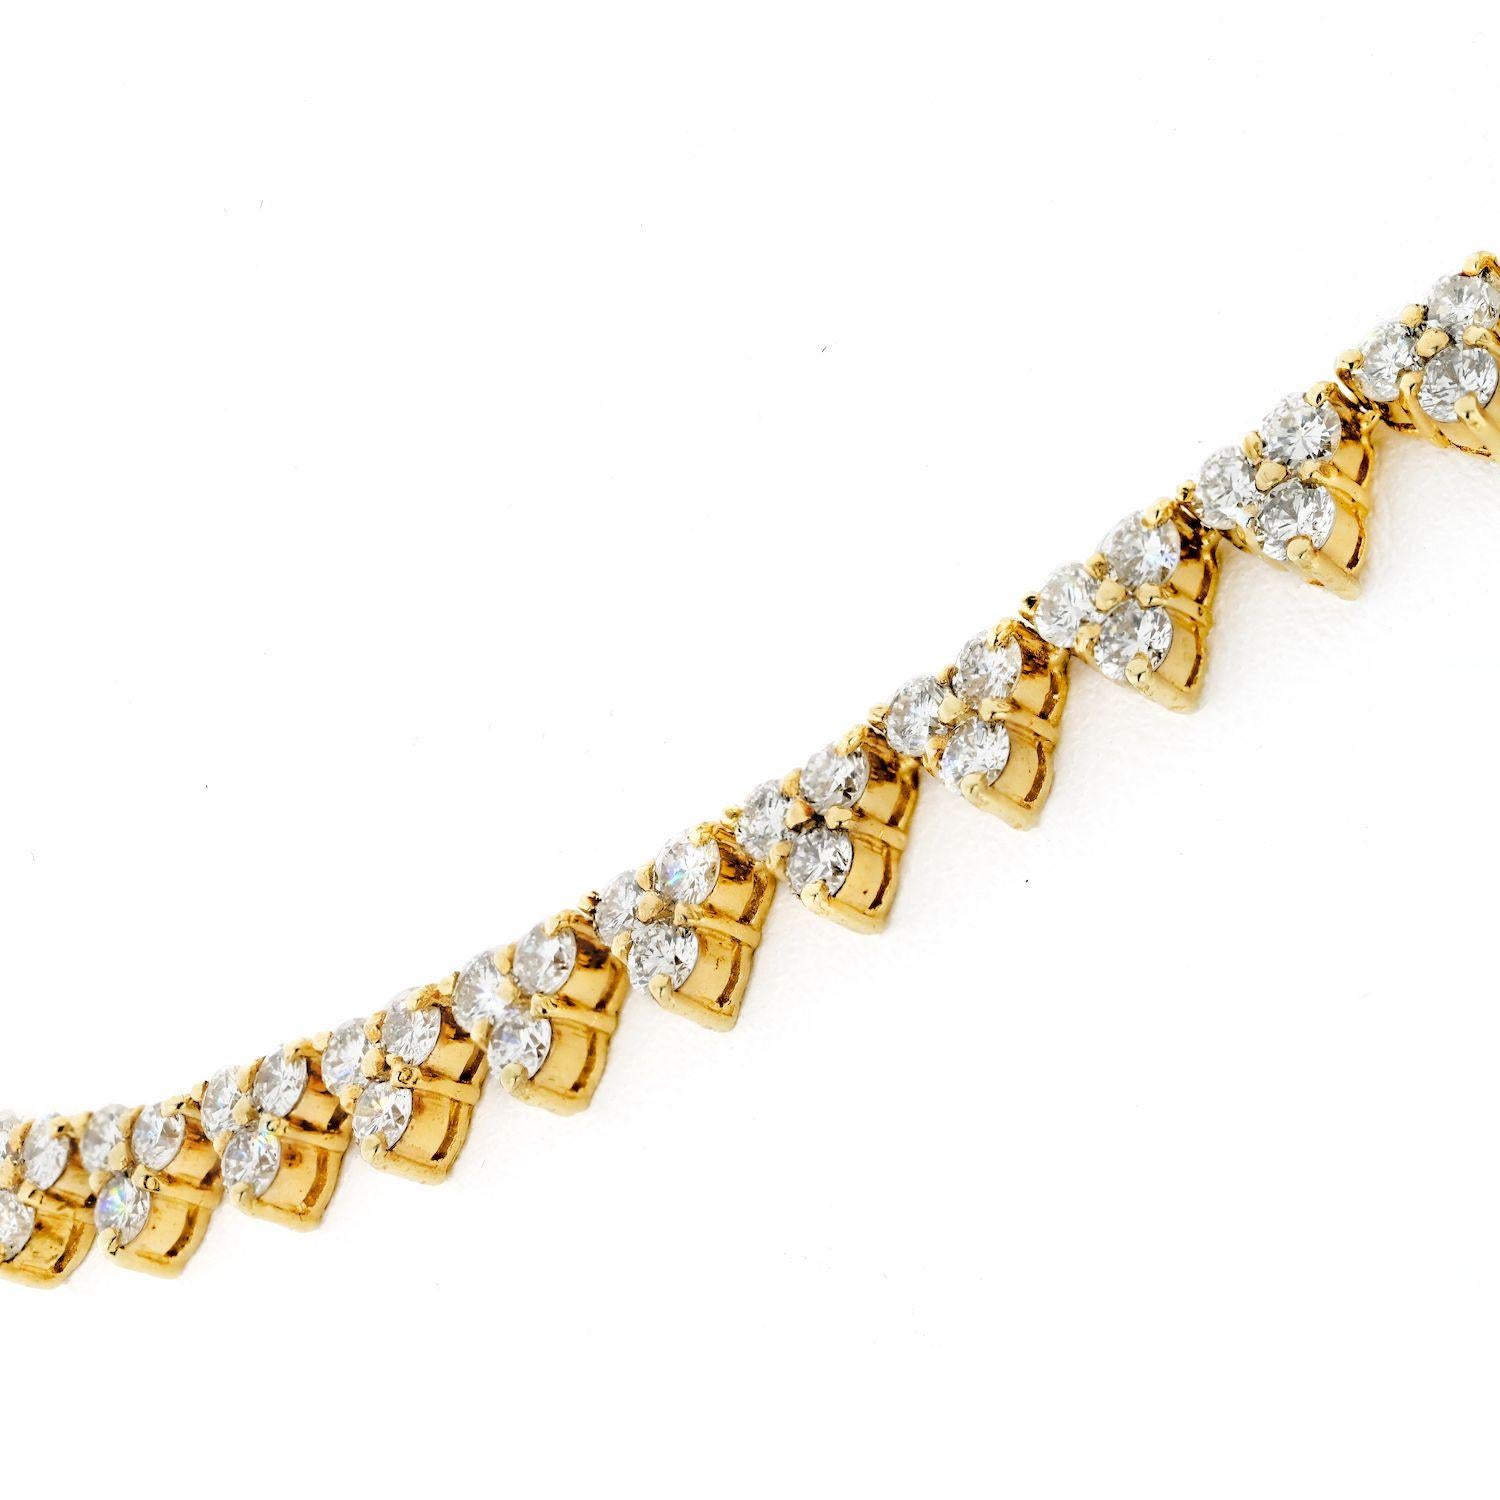 This is a stunning addition to any jewelry collection. The 13.50 ct.t.w. round brilliant-cut diamonds and the prong set trio design of polished 14kt yellow gold create a luxurious and elegant look that any lady would surely appreciate. The